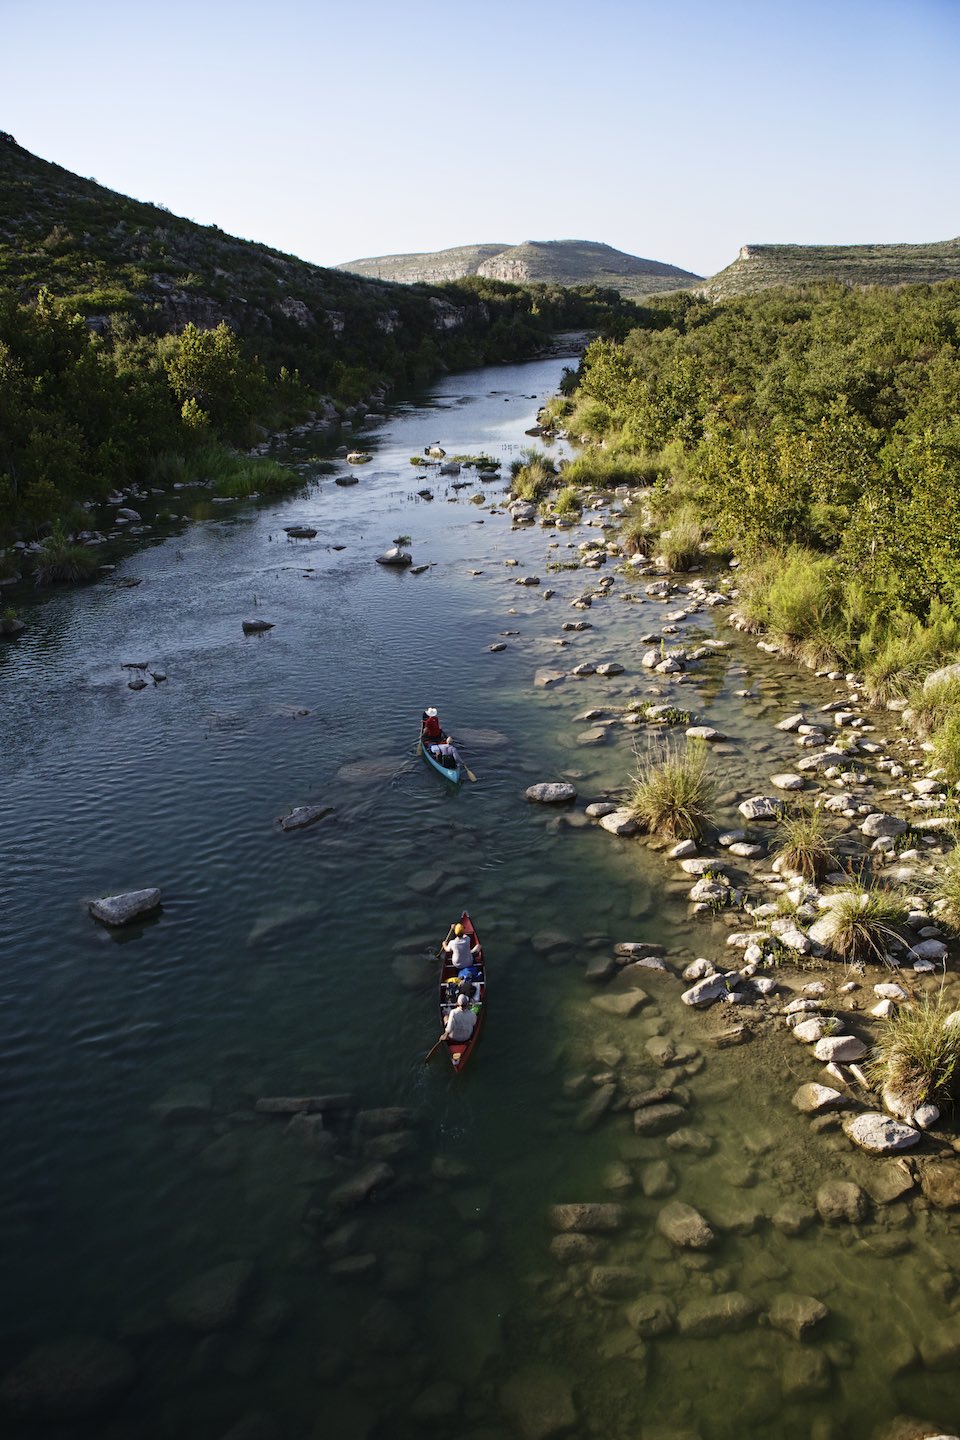 Two canoes traveling down a shallow and rocky riverbed.